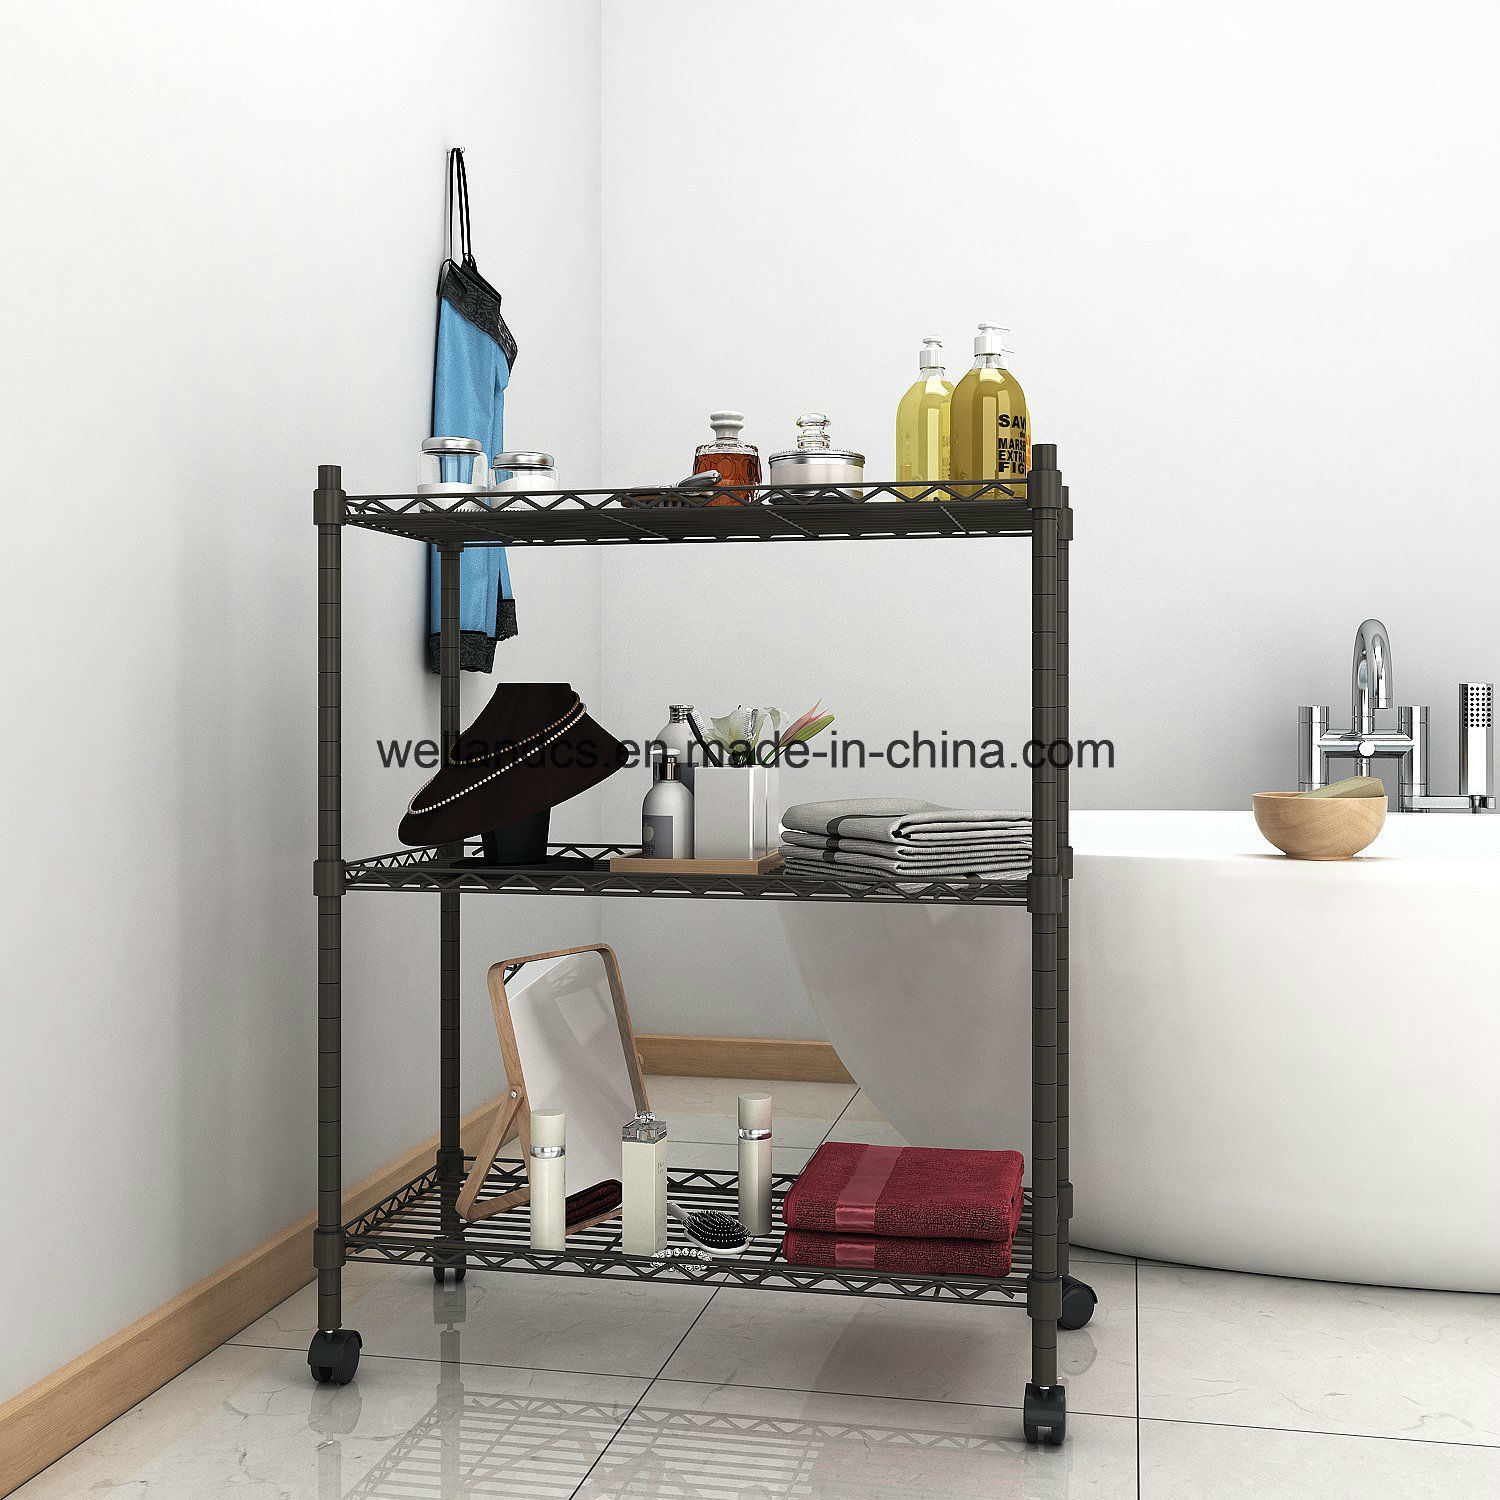 /proimages/2f0j00LJeagCdBwSqv/carbon-grey-powder-coated-3-tire-bathroom-adjustable-shelf-height-wire-shelving-rack-with-nylon-casters-diy-no-tools-assembly.jpg